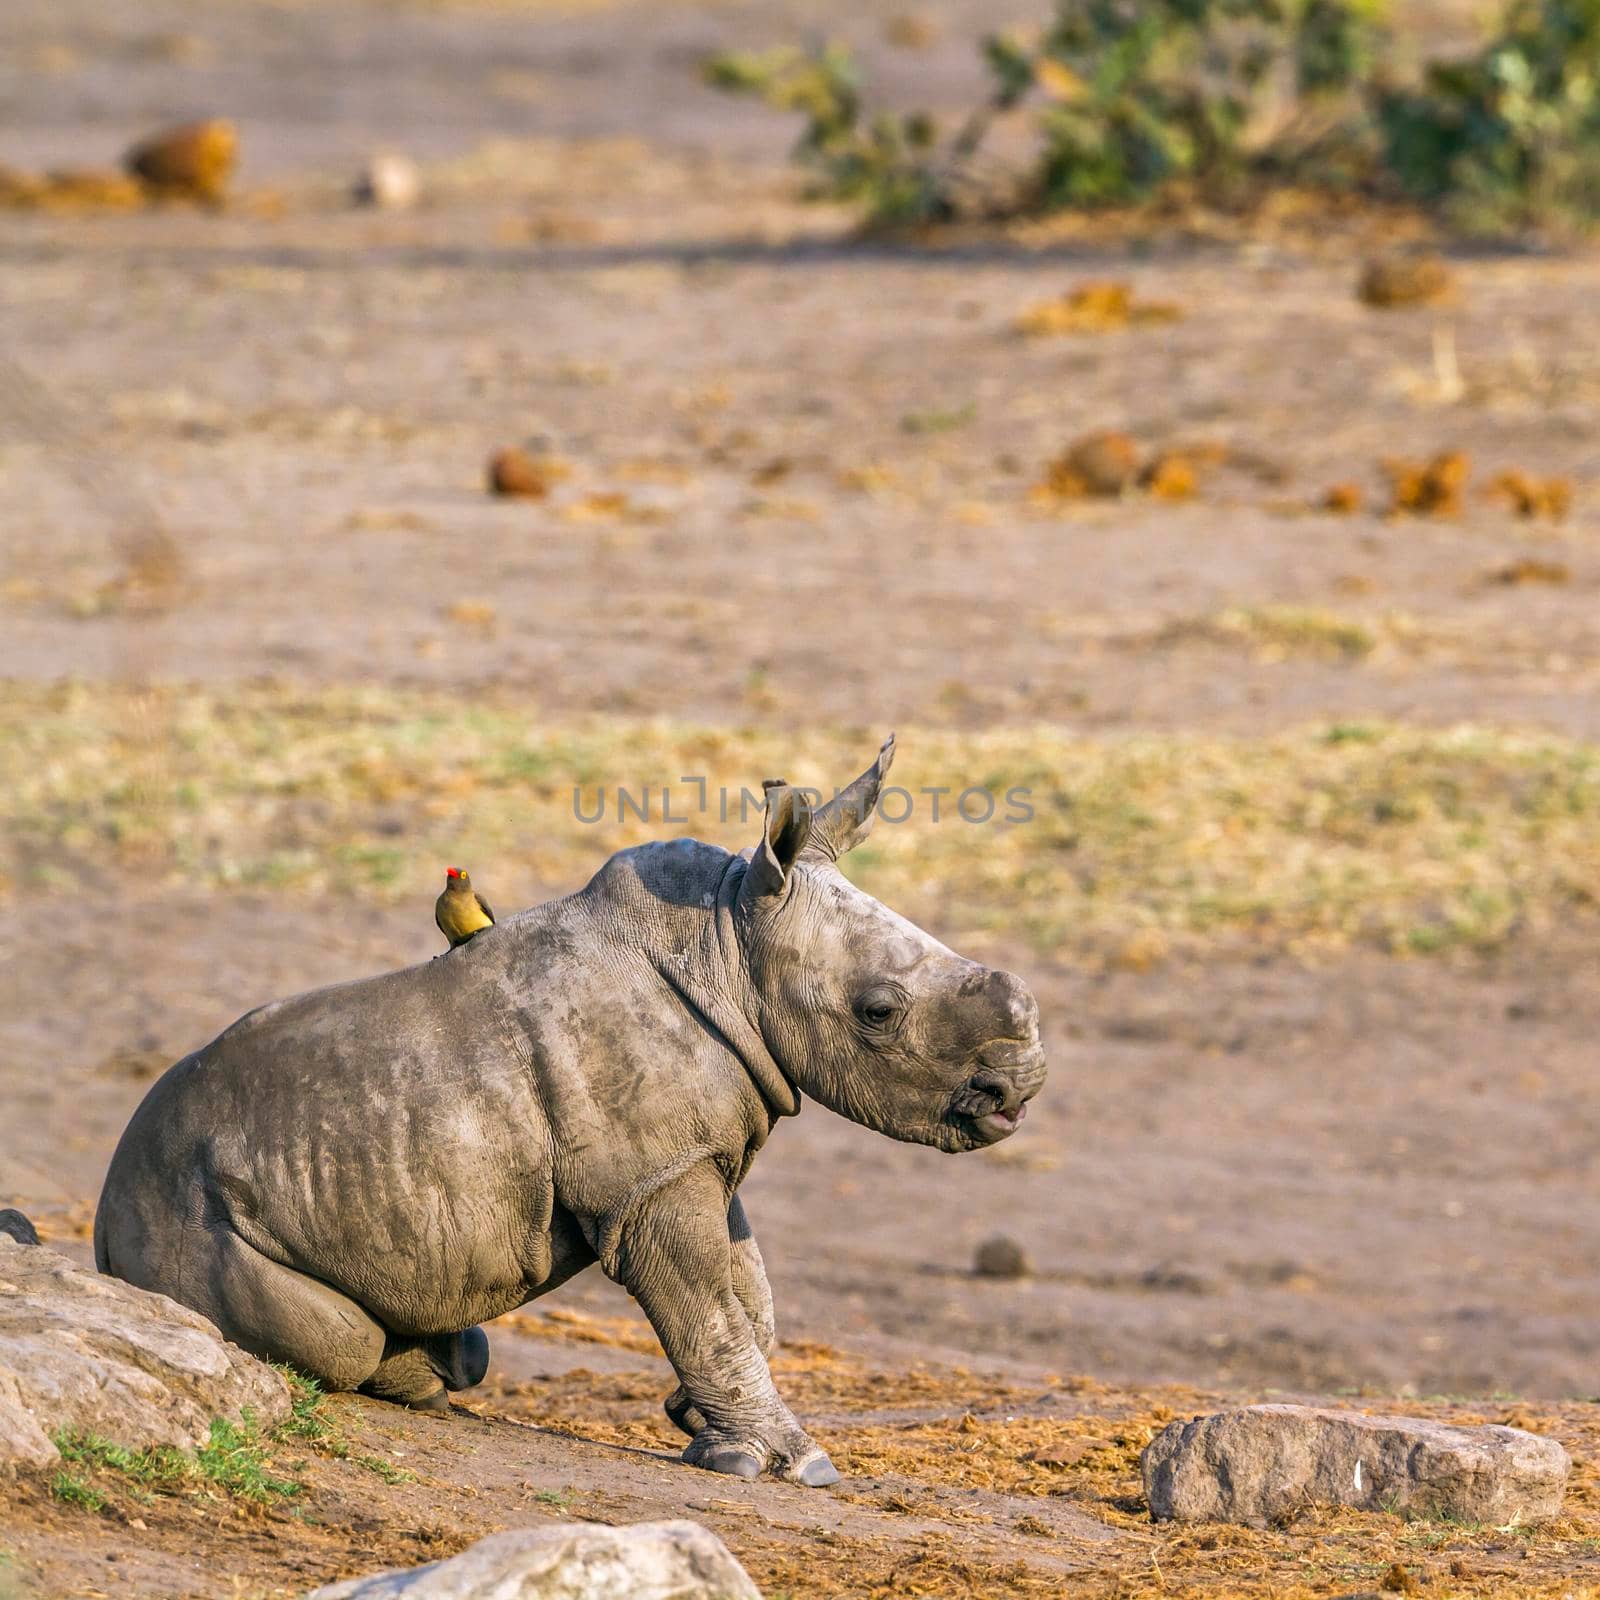 Southern white rhinoceros in Kruger National park, South Africa by PACOCOMO